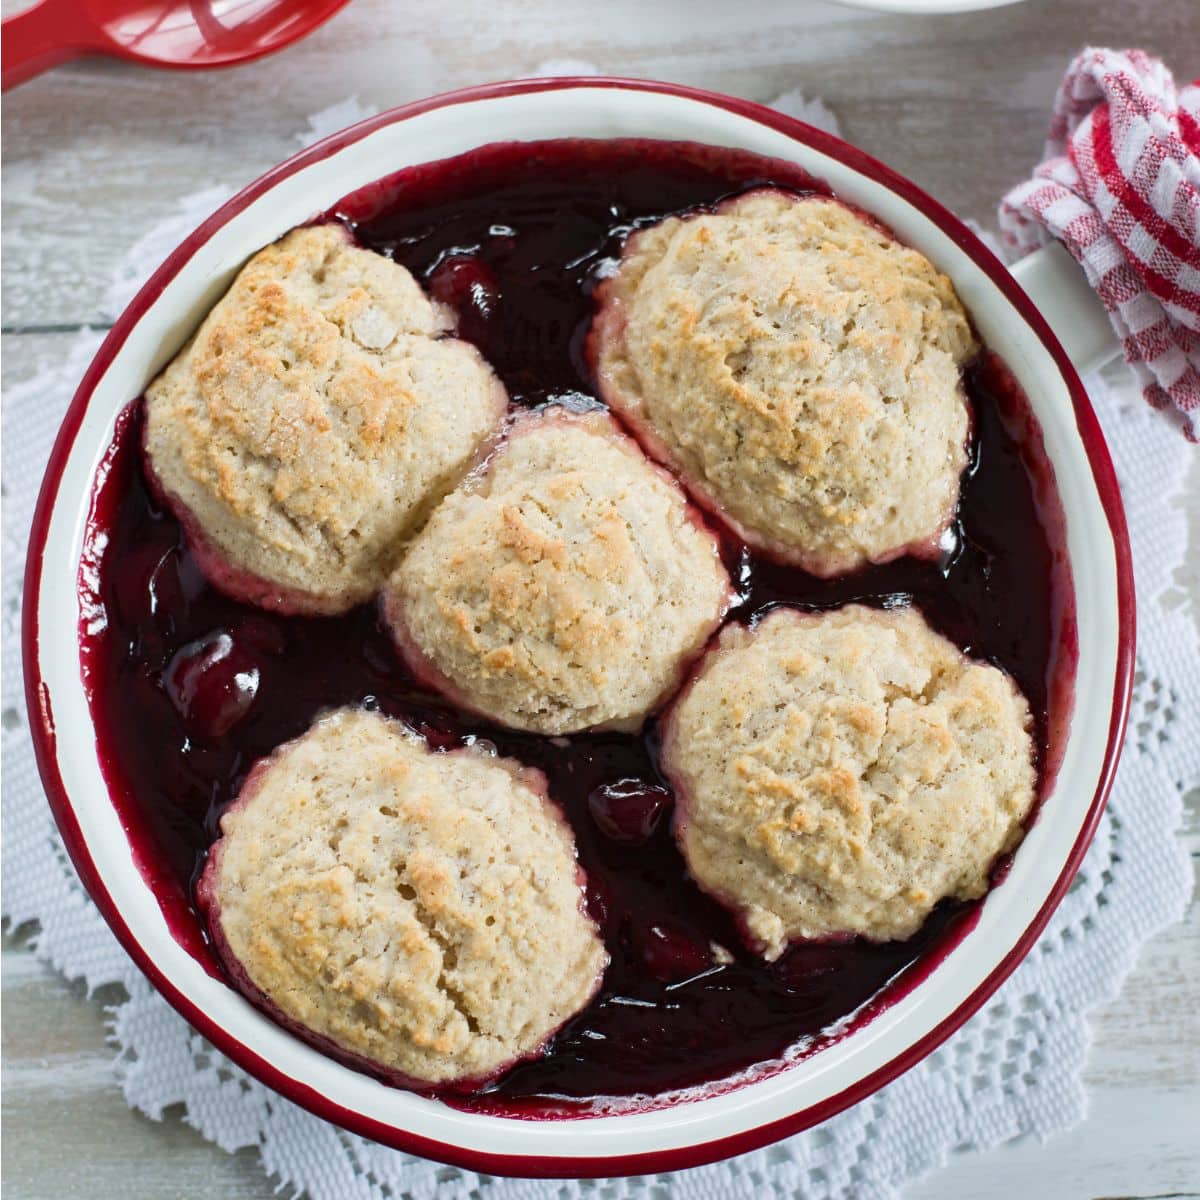 A round pan filled with freshly baked cherry cobbler.